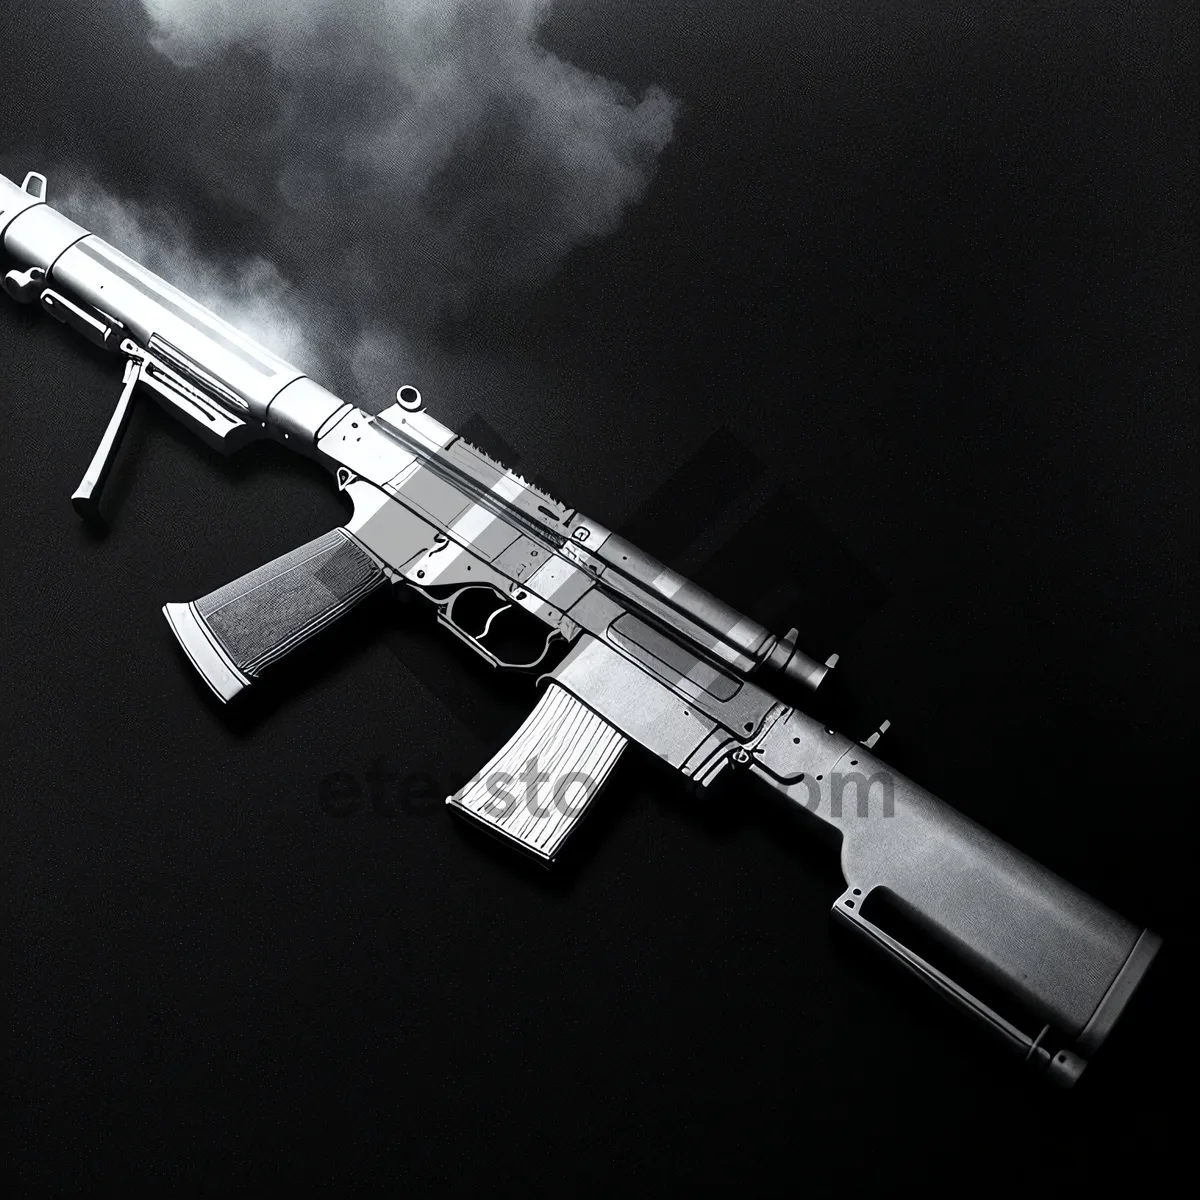 Picture of High-powered Metal Assault Rifle: The Ultimate Firearm Instrument